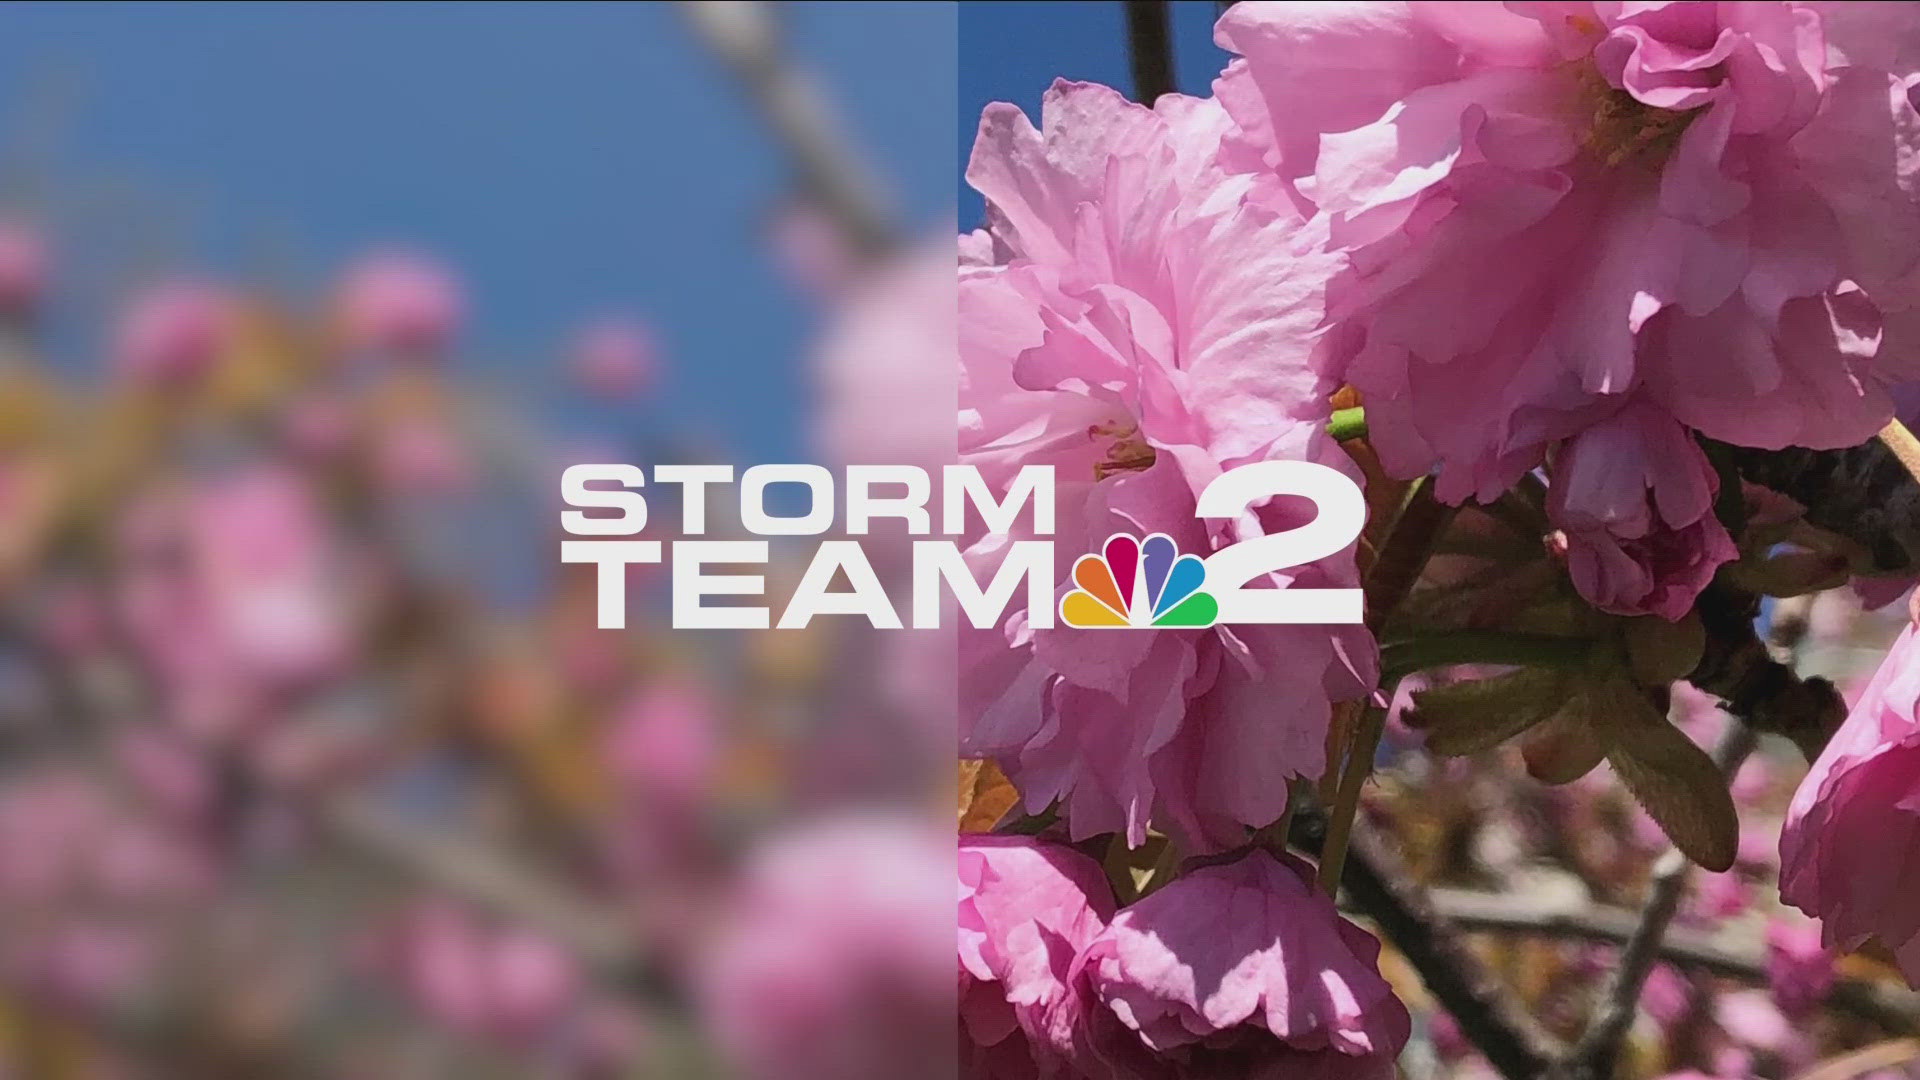 Storm Team 2 night forecast with Jennifer Stanonis for Thursday, May 16.